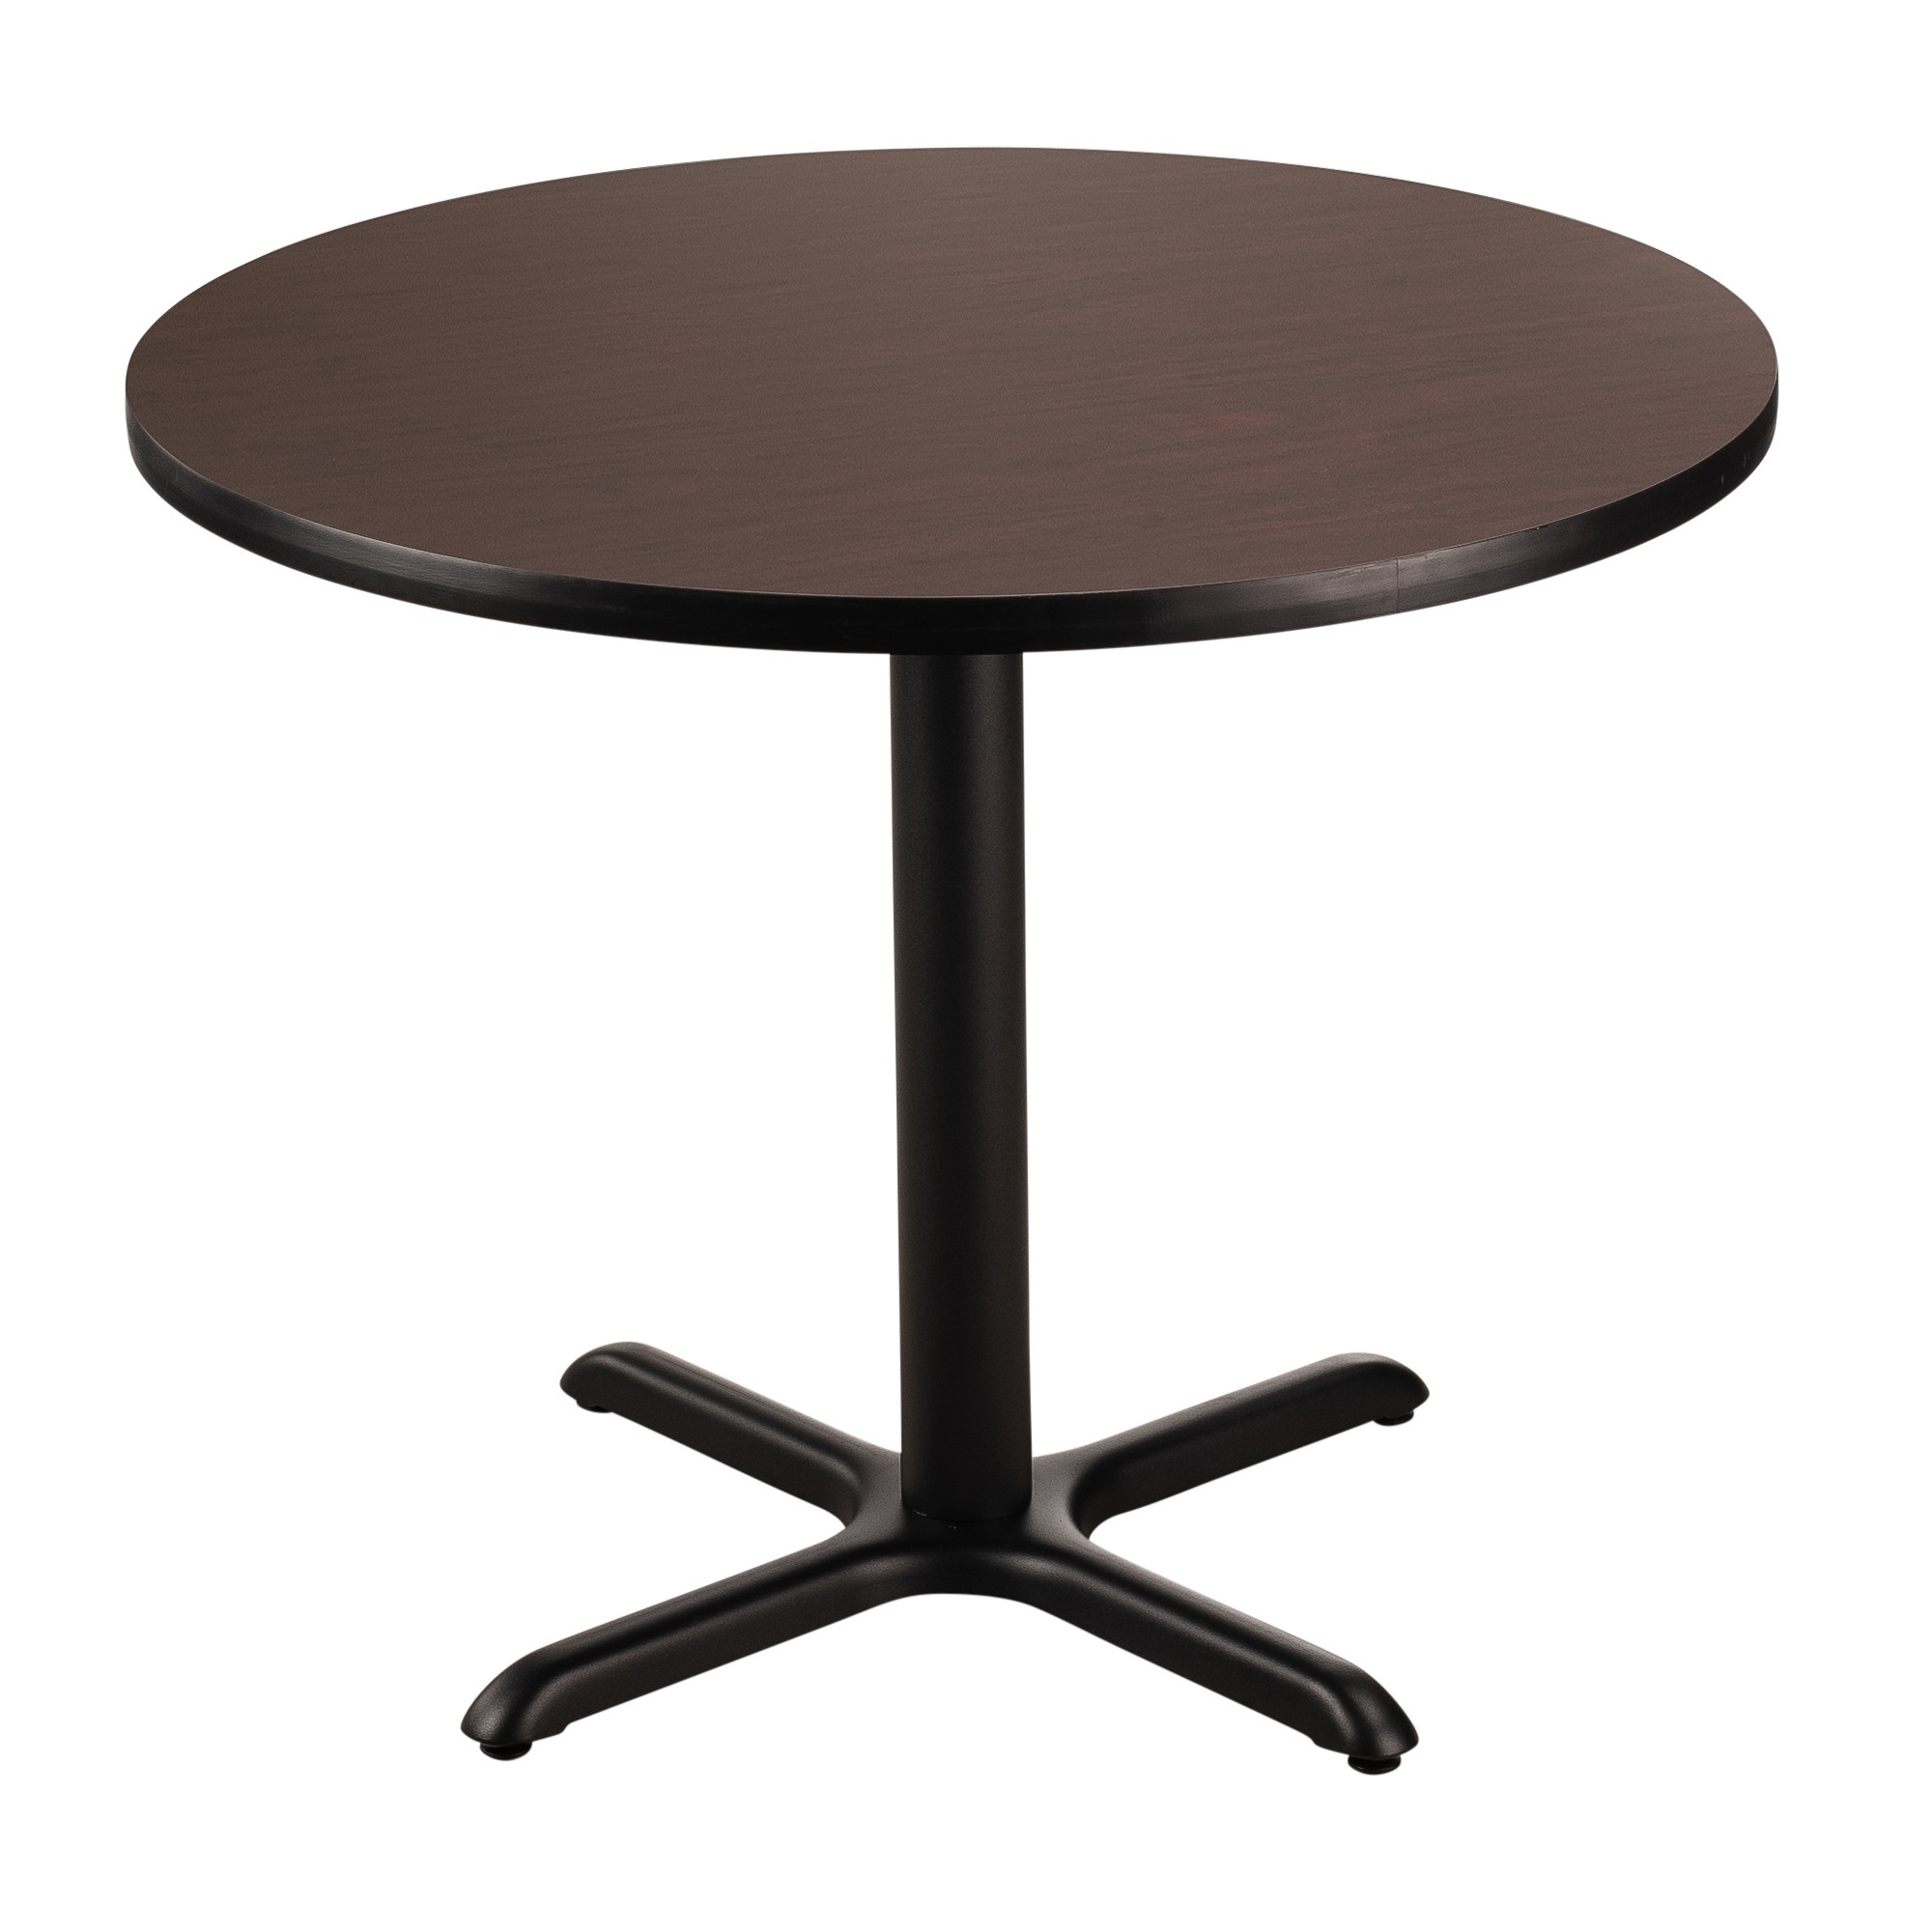 "National Public Seating, Cafe Table, 36x36x30 Round ""X"" Base, Height 30 in, Model CT13636XDPBTMMY"